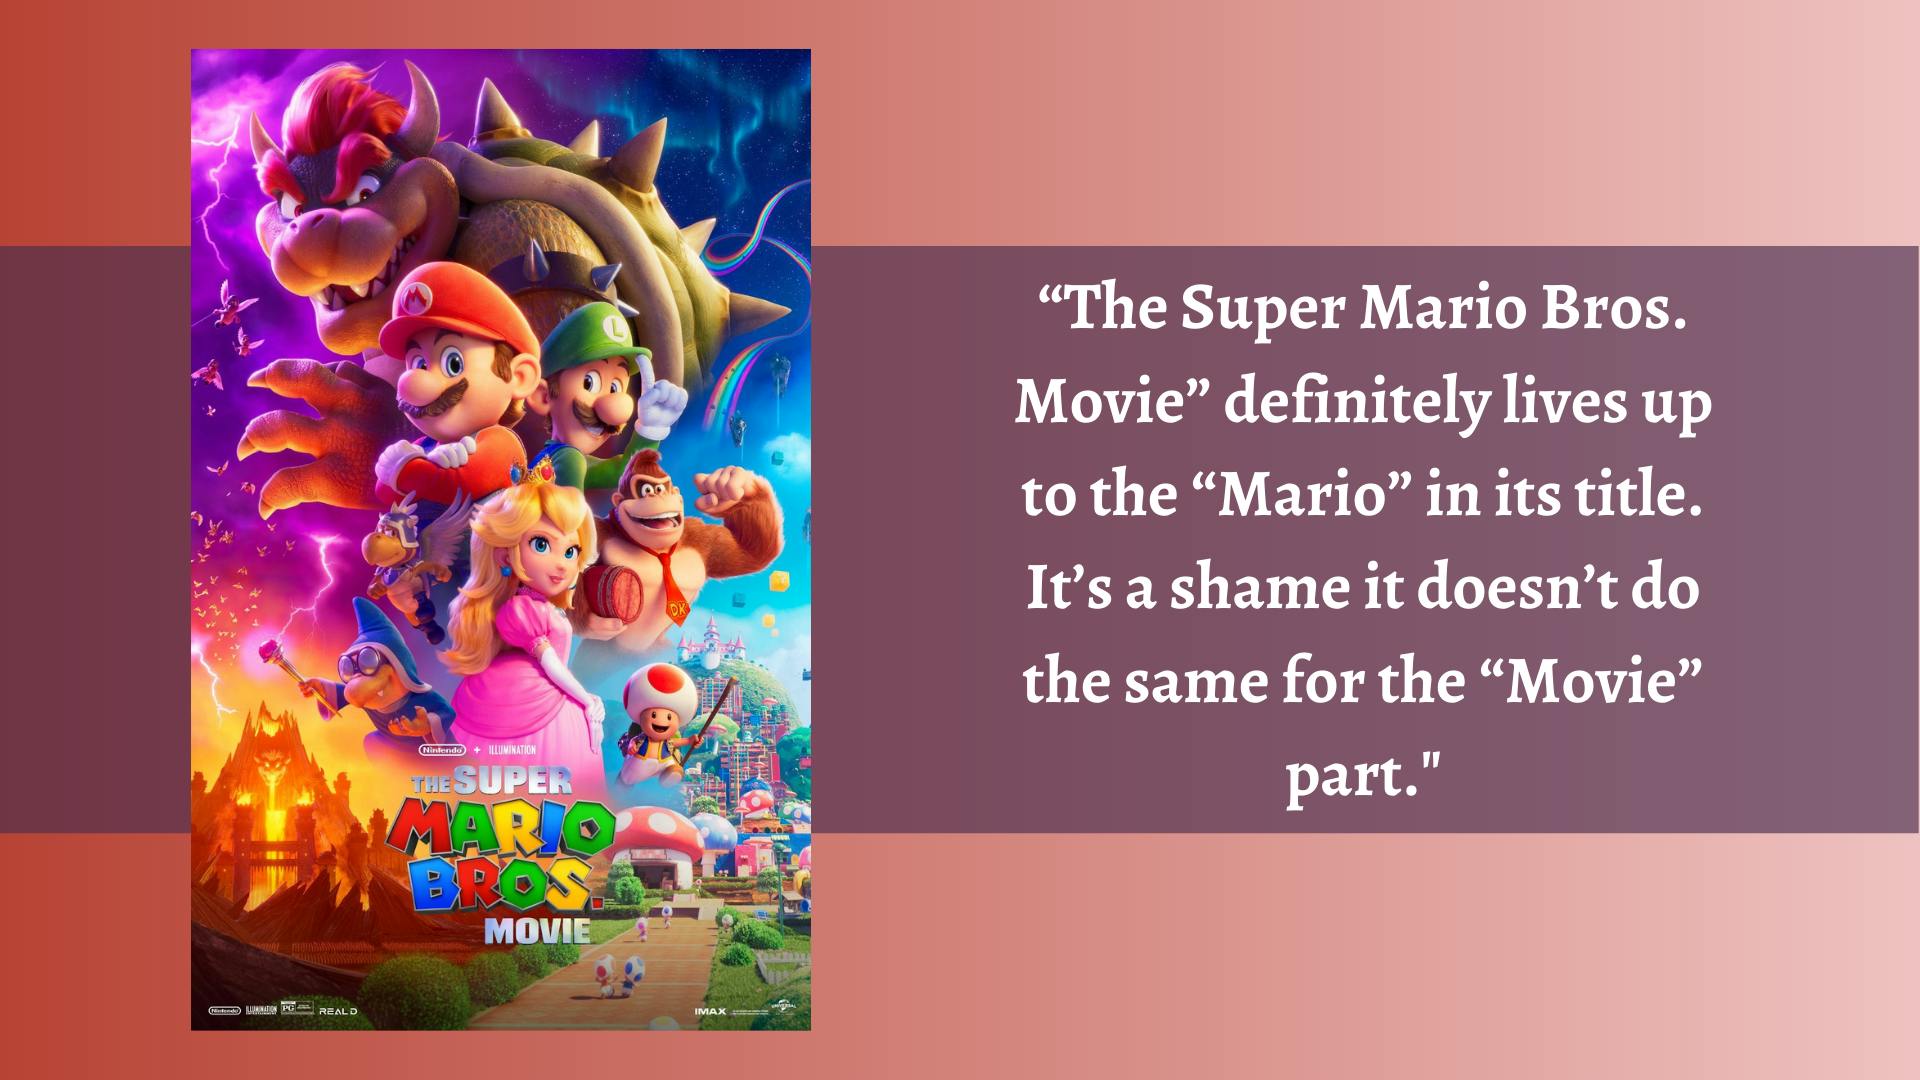 It's-a disappointment: Mario movie rehashes video game adaptation trash -  The Miami Student